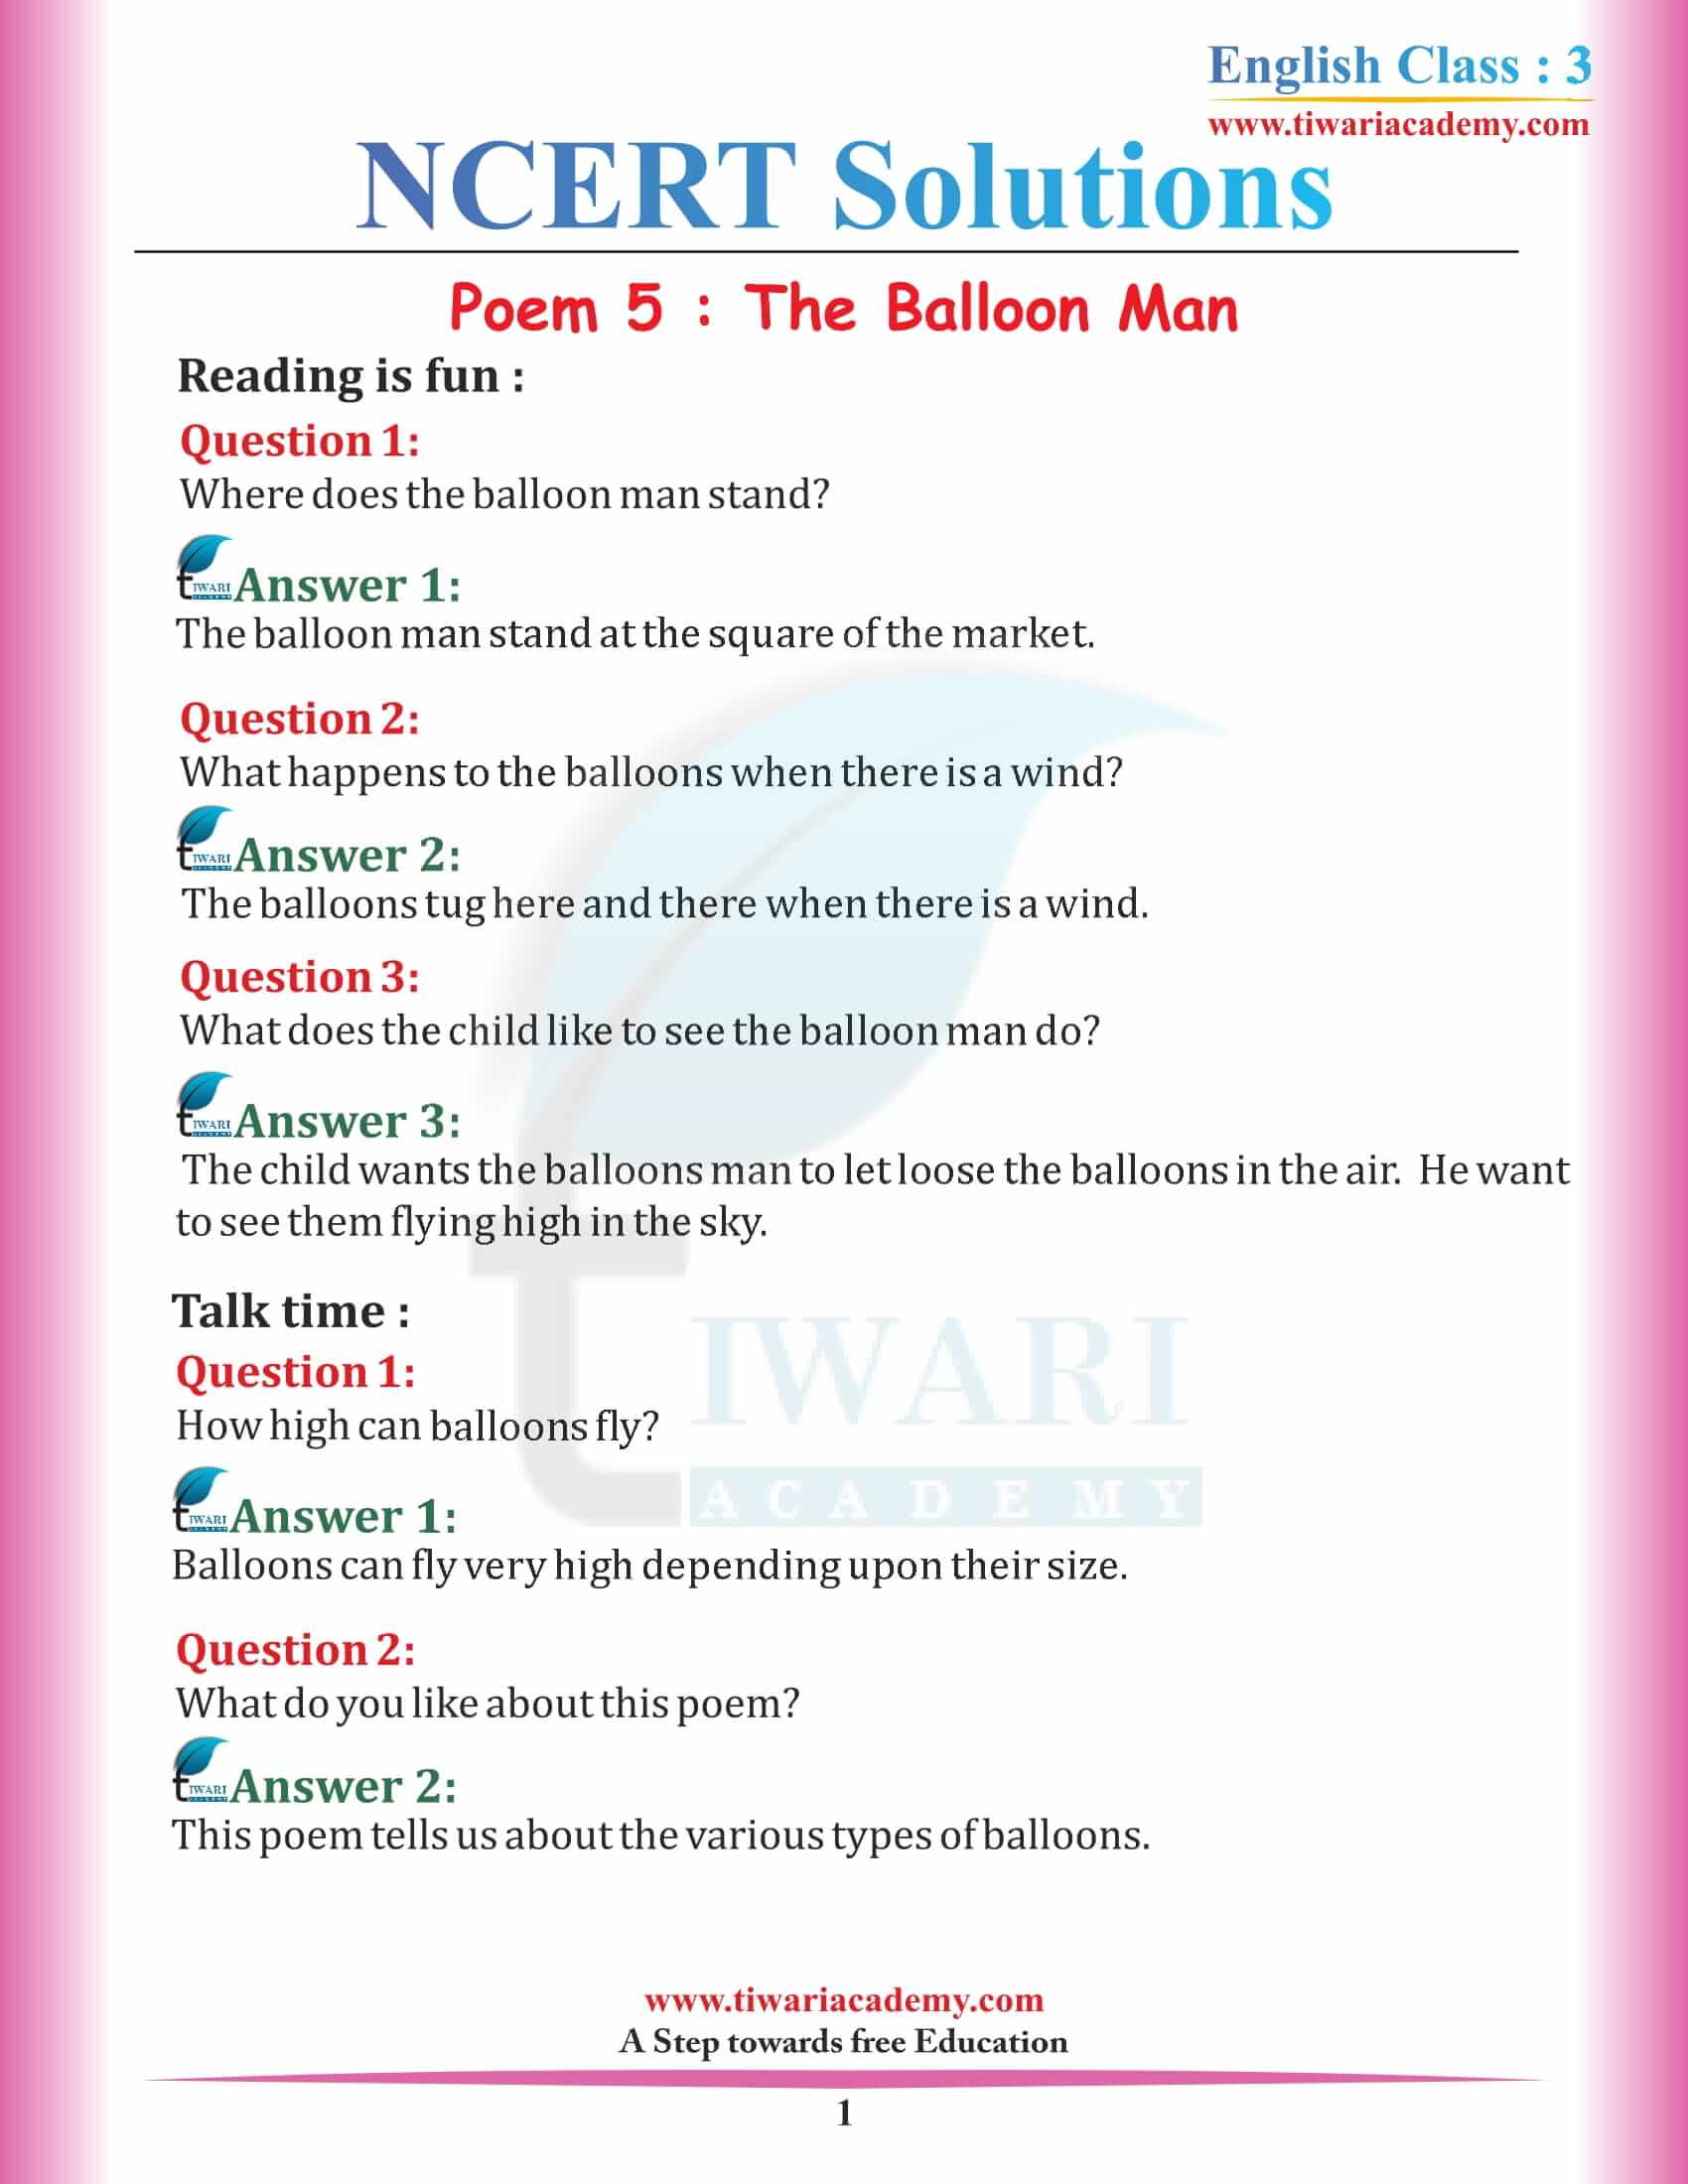 NCERT Solutions for Class 3 English Marigold 3 Unit 5 Chapter 1 The Balloon Man